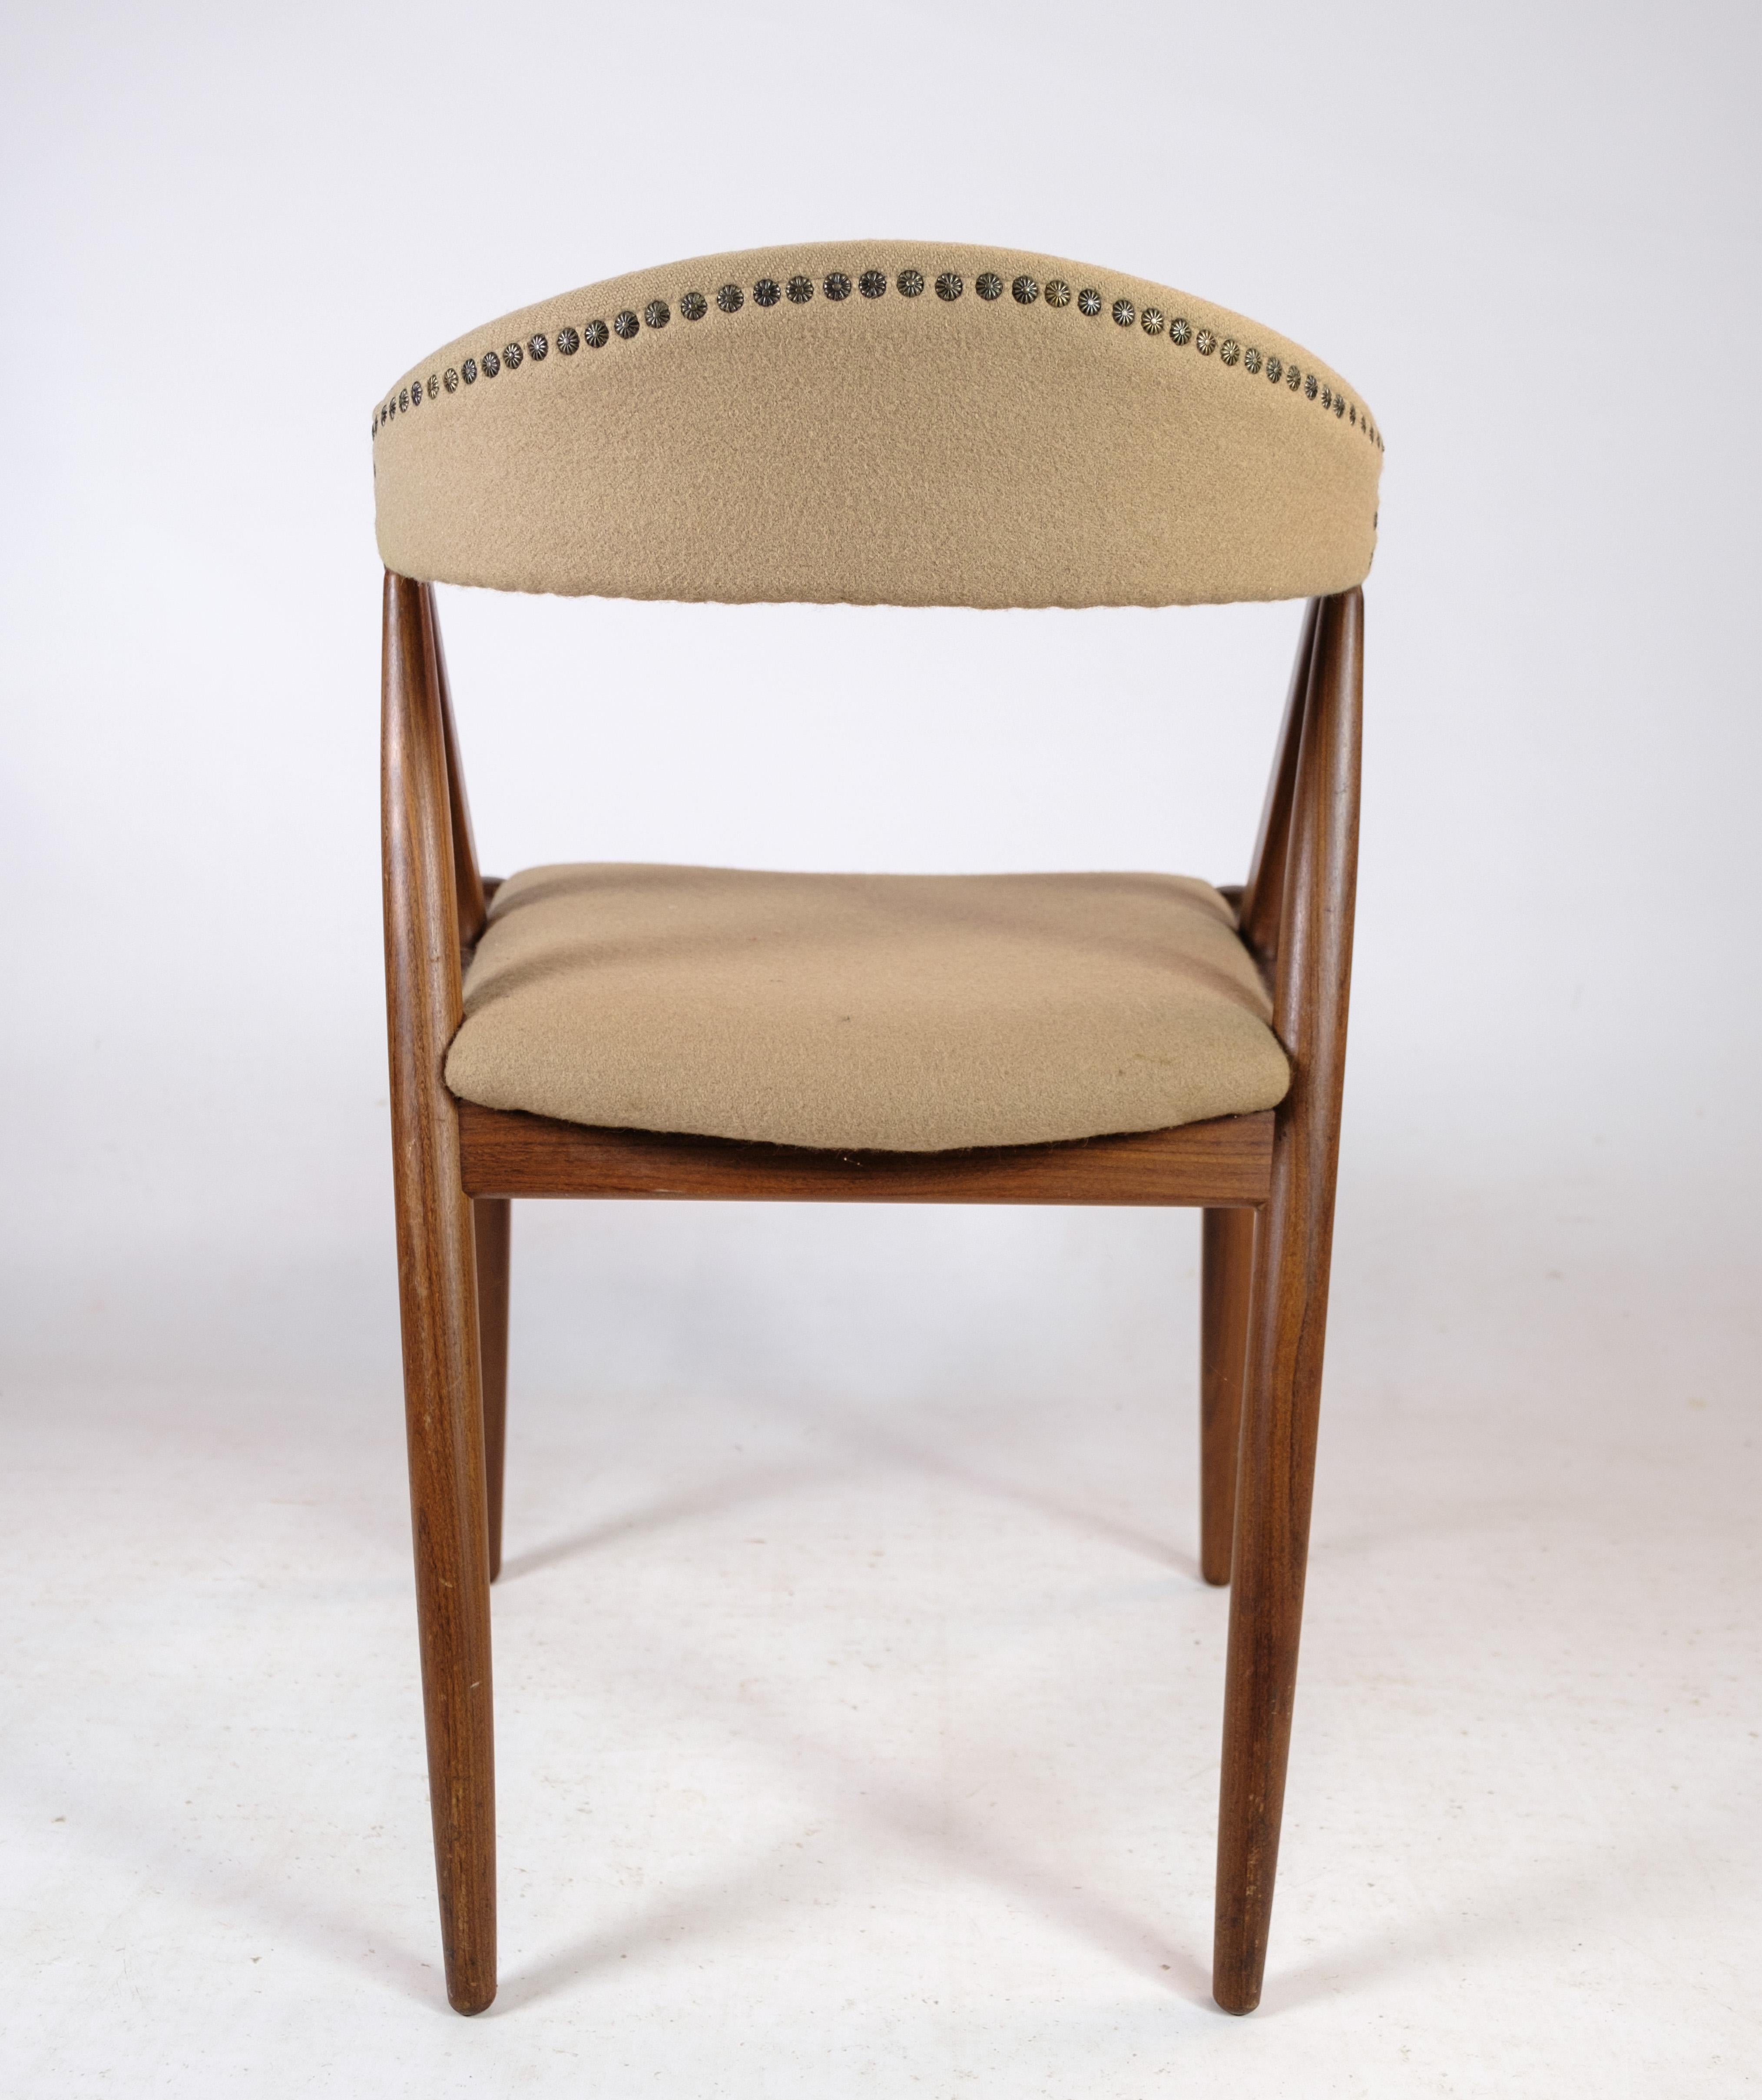 4 Dining Room Chairs Model 31 Made In Teak, Designed By Kai Kristiansen For Sale 5